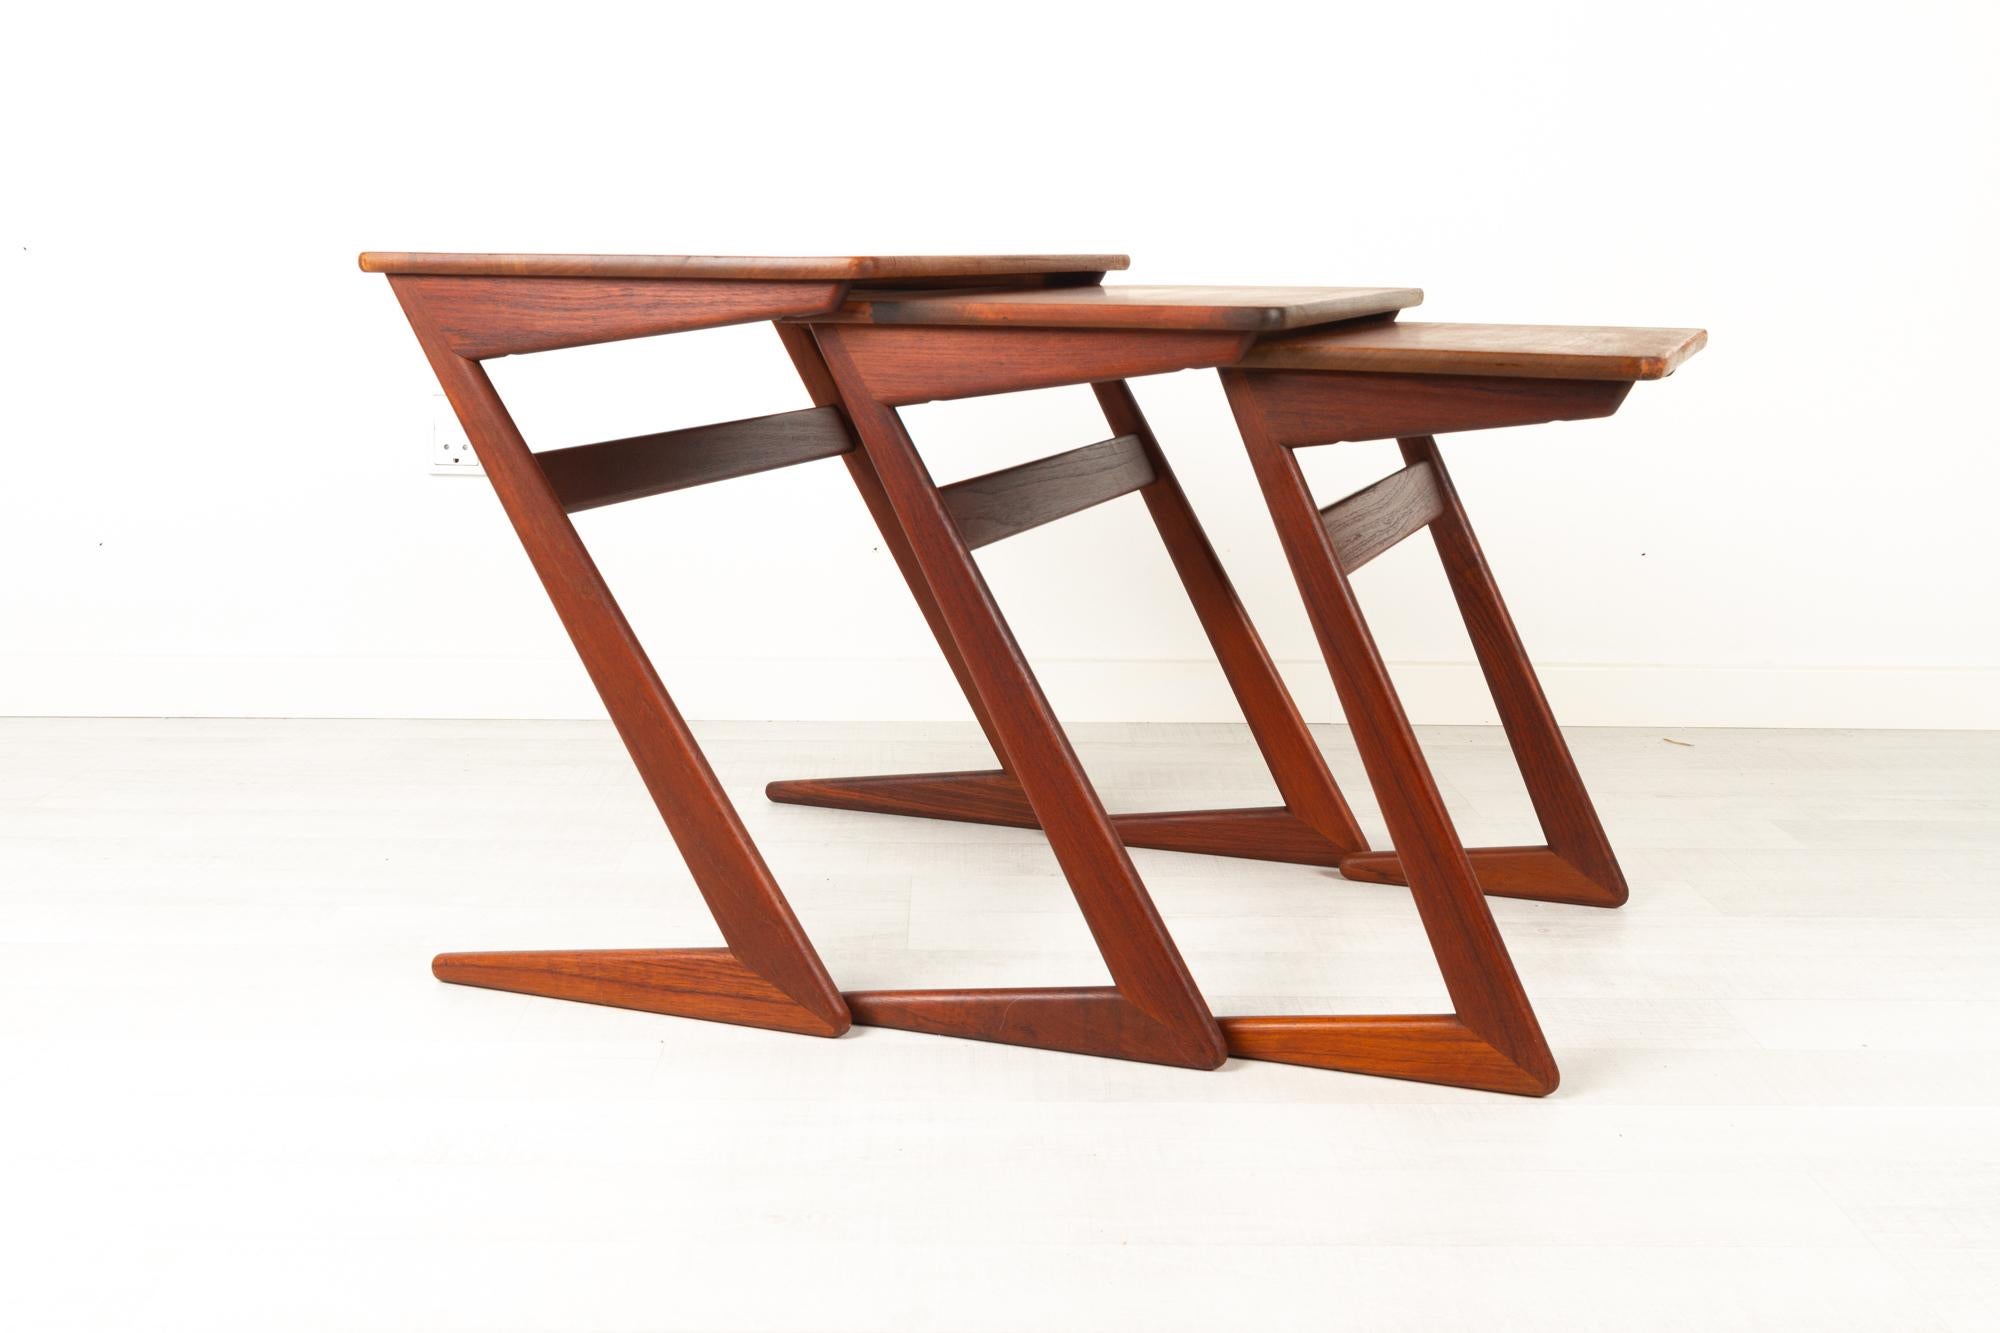 Danish modern Nesting tables by Erling Torvits for Heltborg Møbler 1950s.
Model 90. Rare set of three nesting tables with Z-shaped legs in solid teak. Table tops with teak veneer.
Very suitable as side tables or lamp tables. Classic but rare